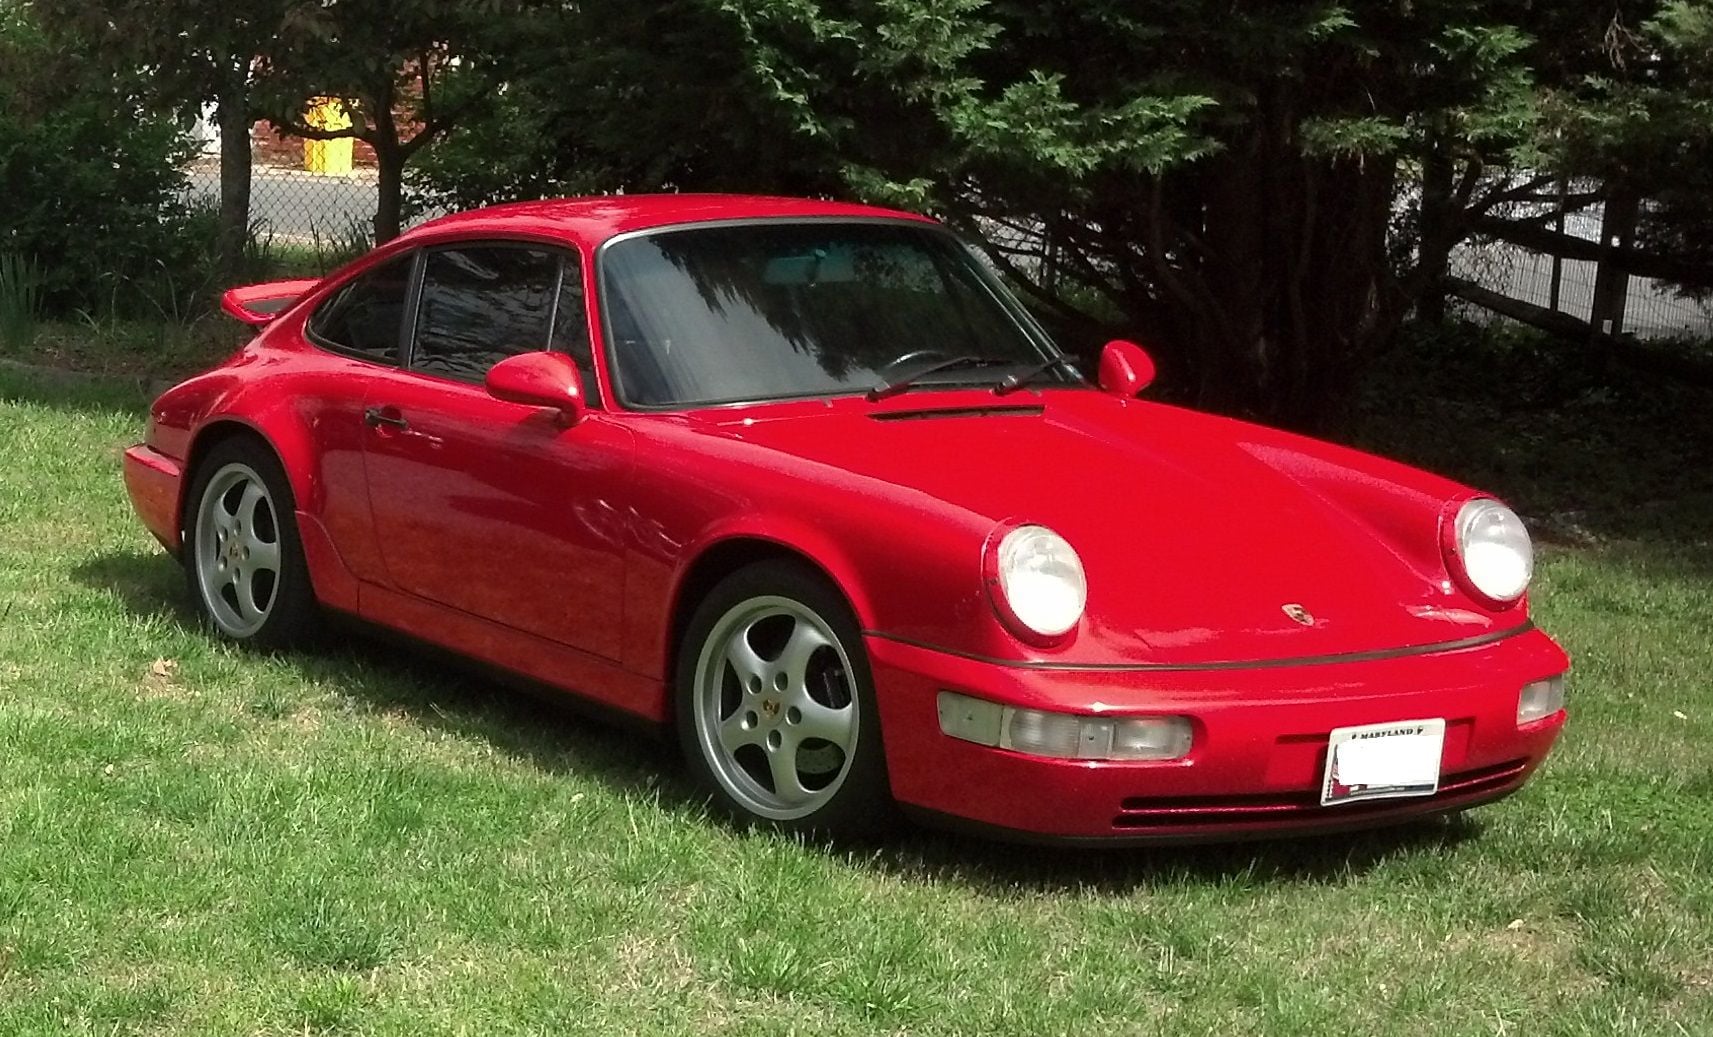 1990 Porsche 911 - 1990 Rat Rod - Used - VIN will post - 106,000 Miles - Manual - Coupe - Red - Severna Park, MD 21146, United States